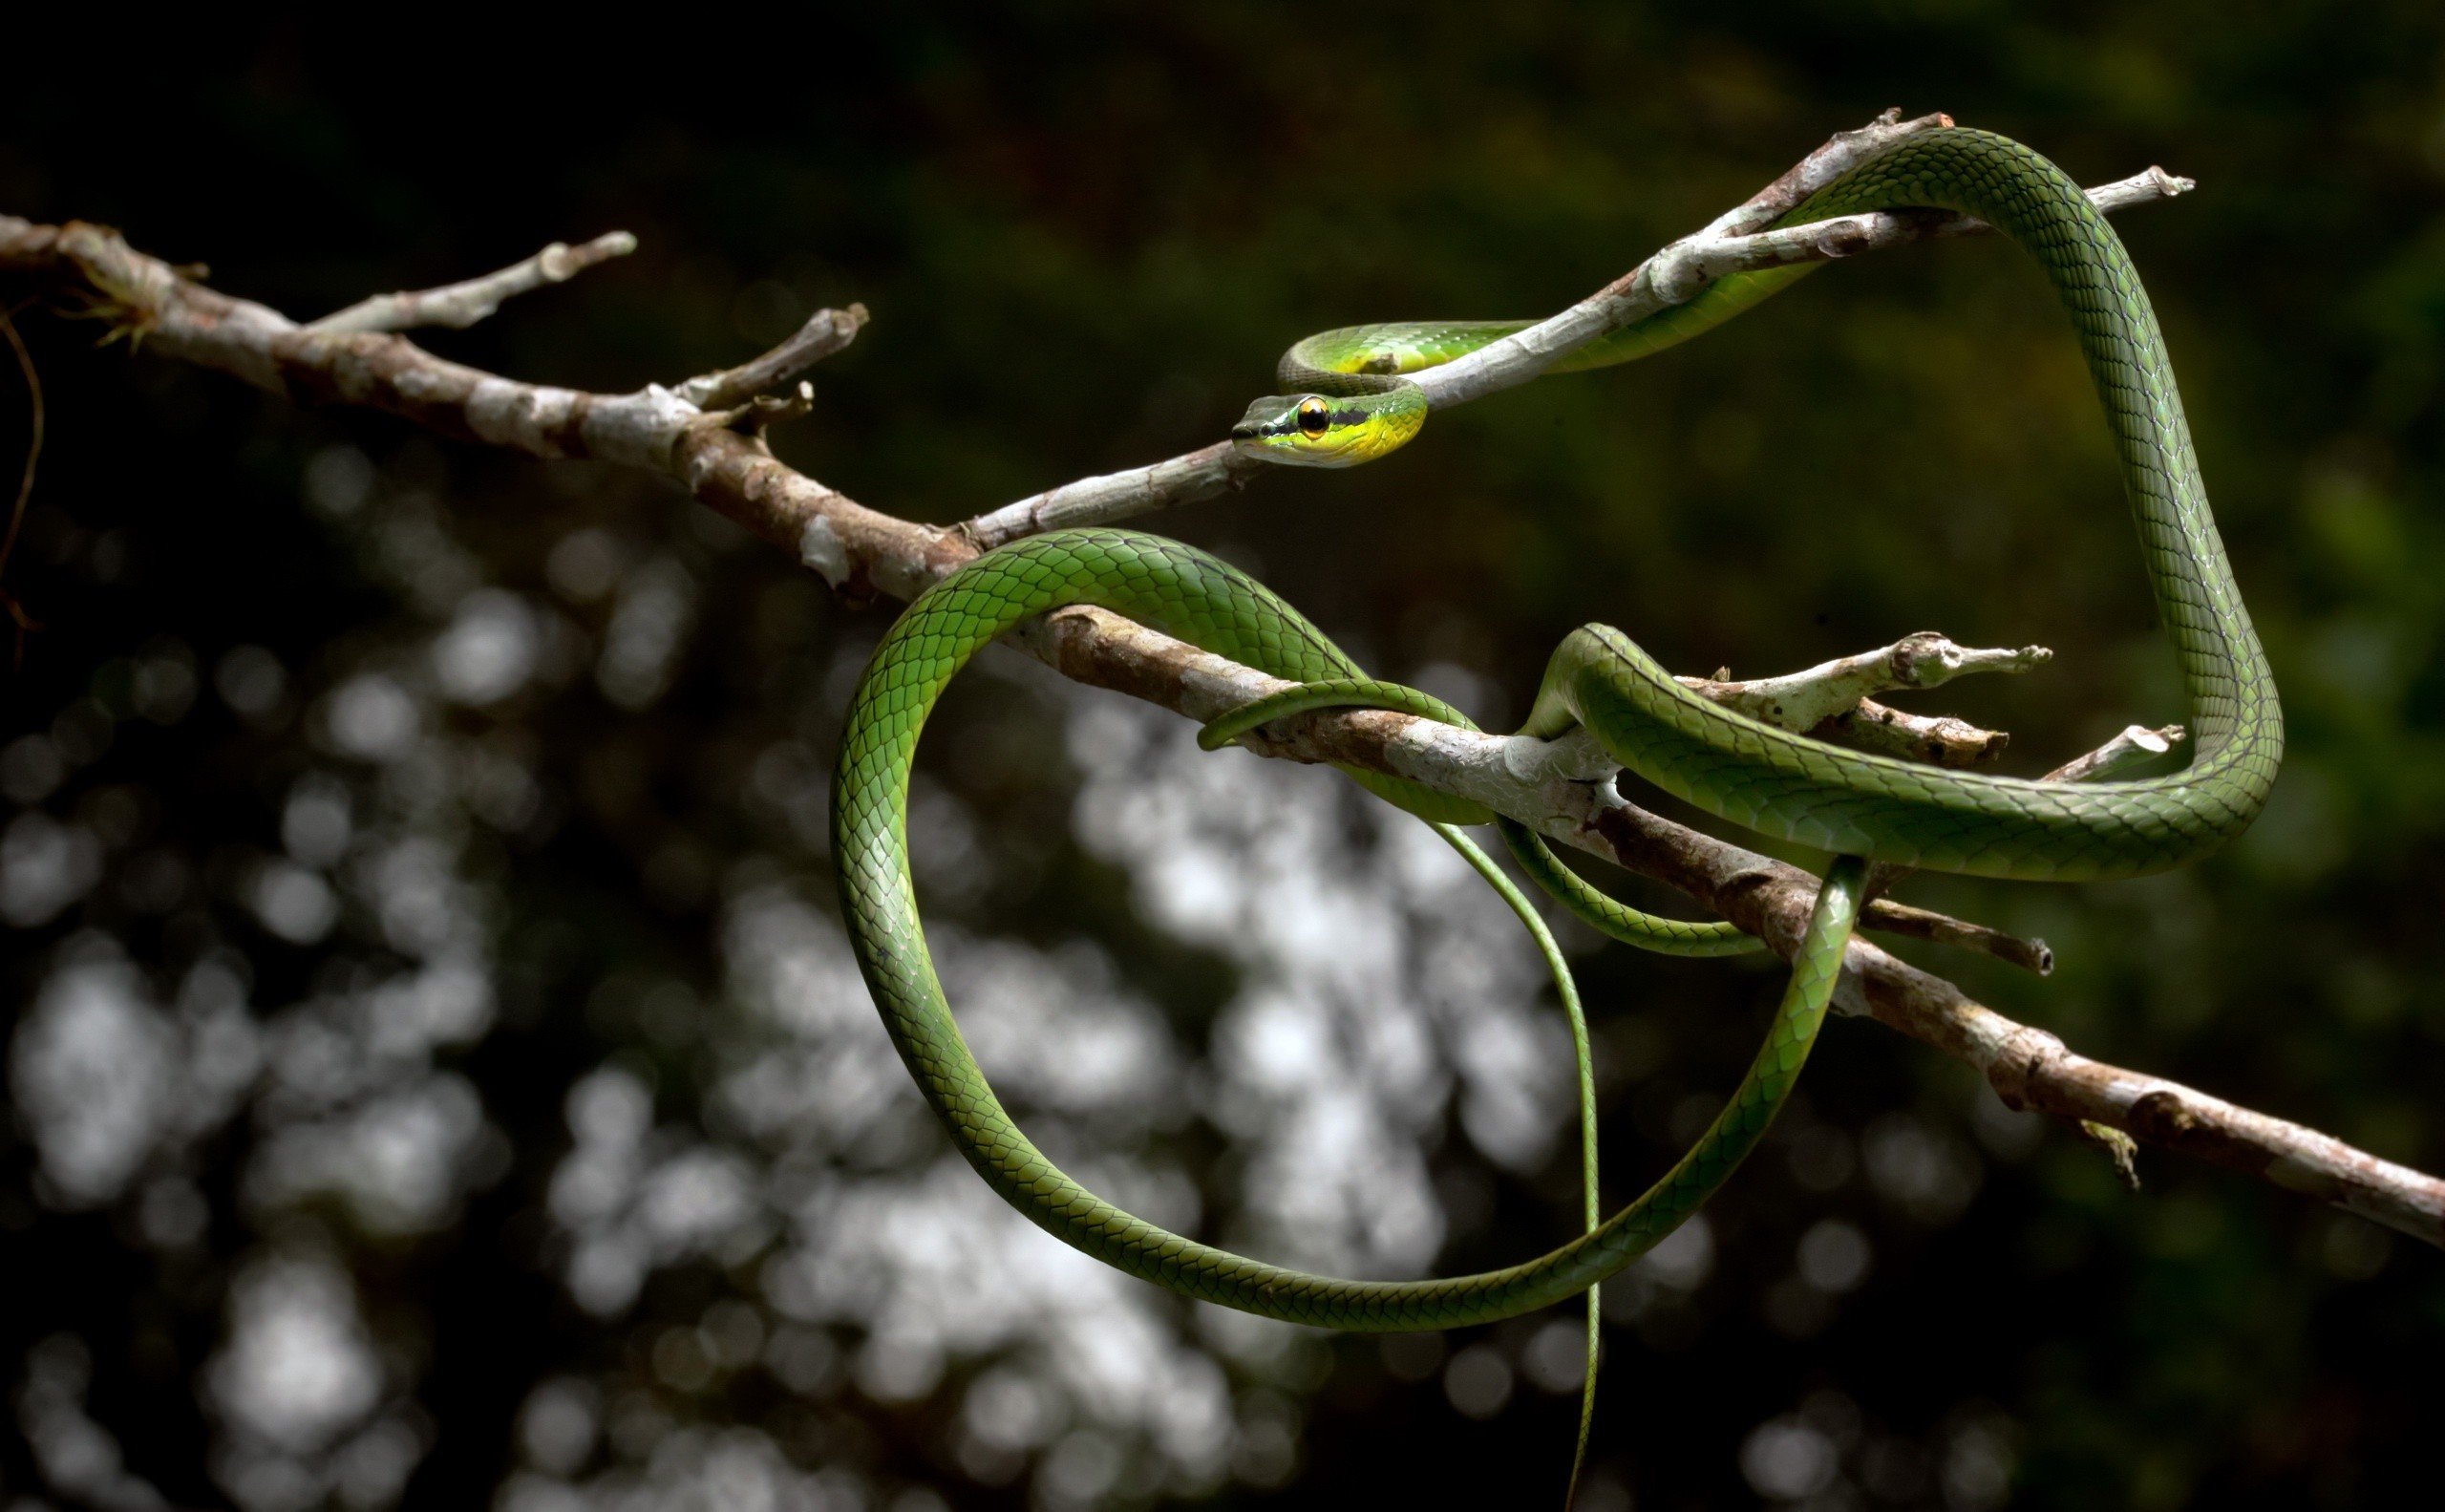 Wallpapers animals branch reptiles on the desktop